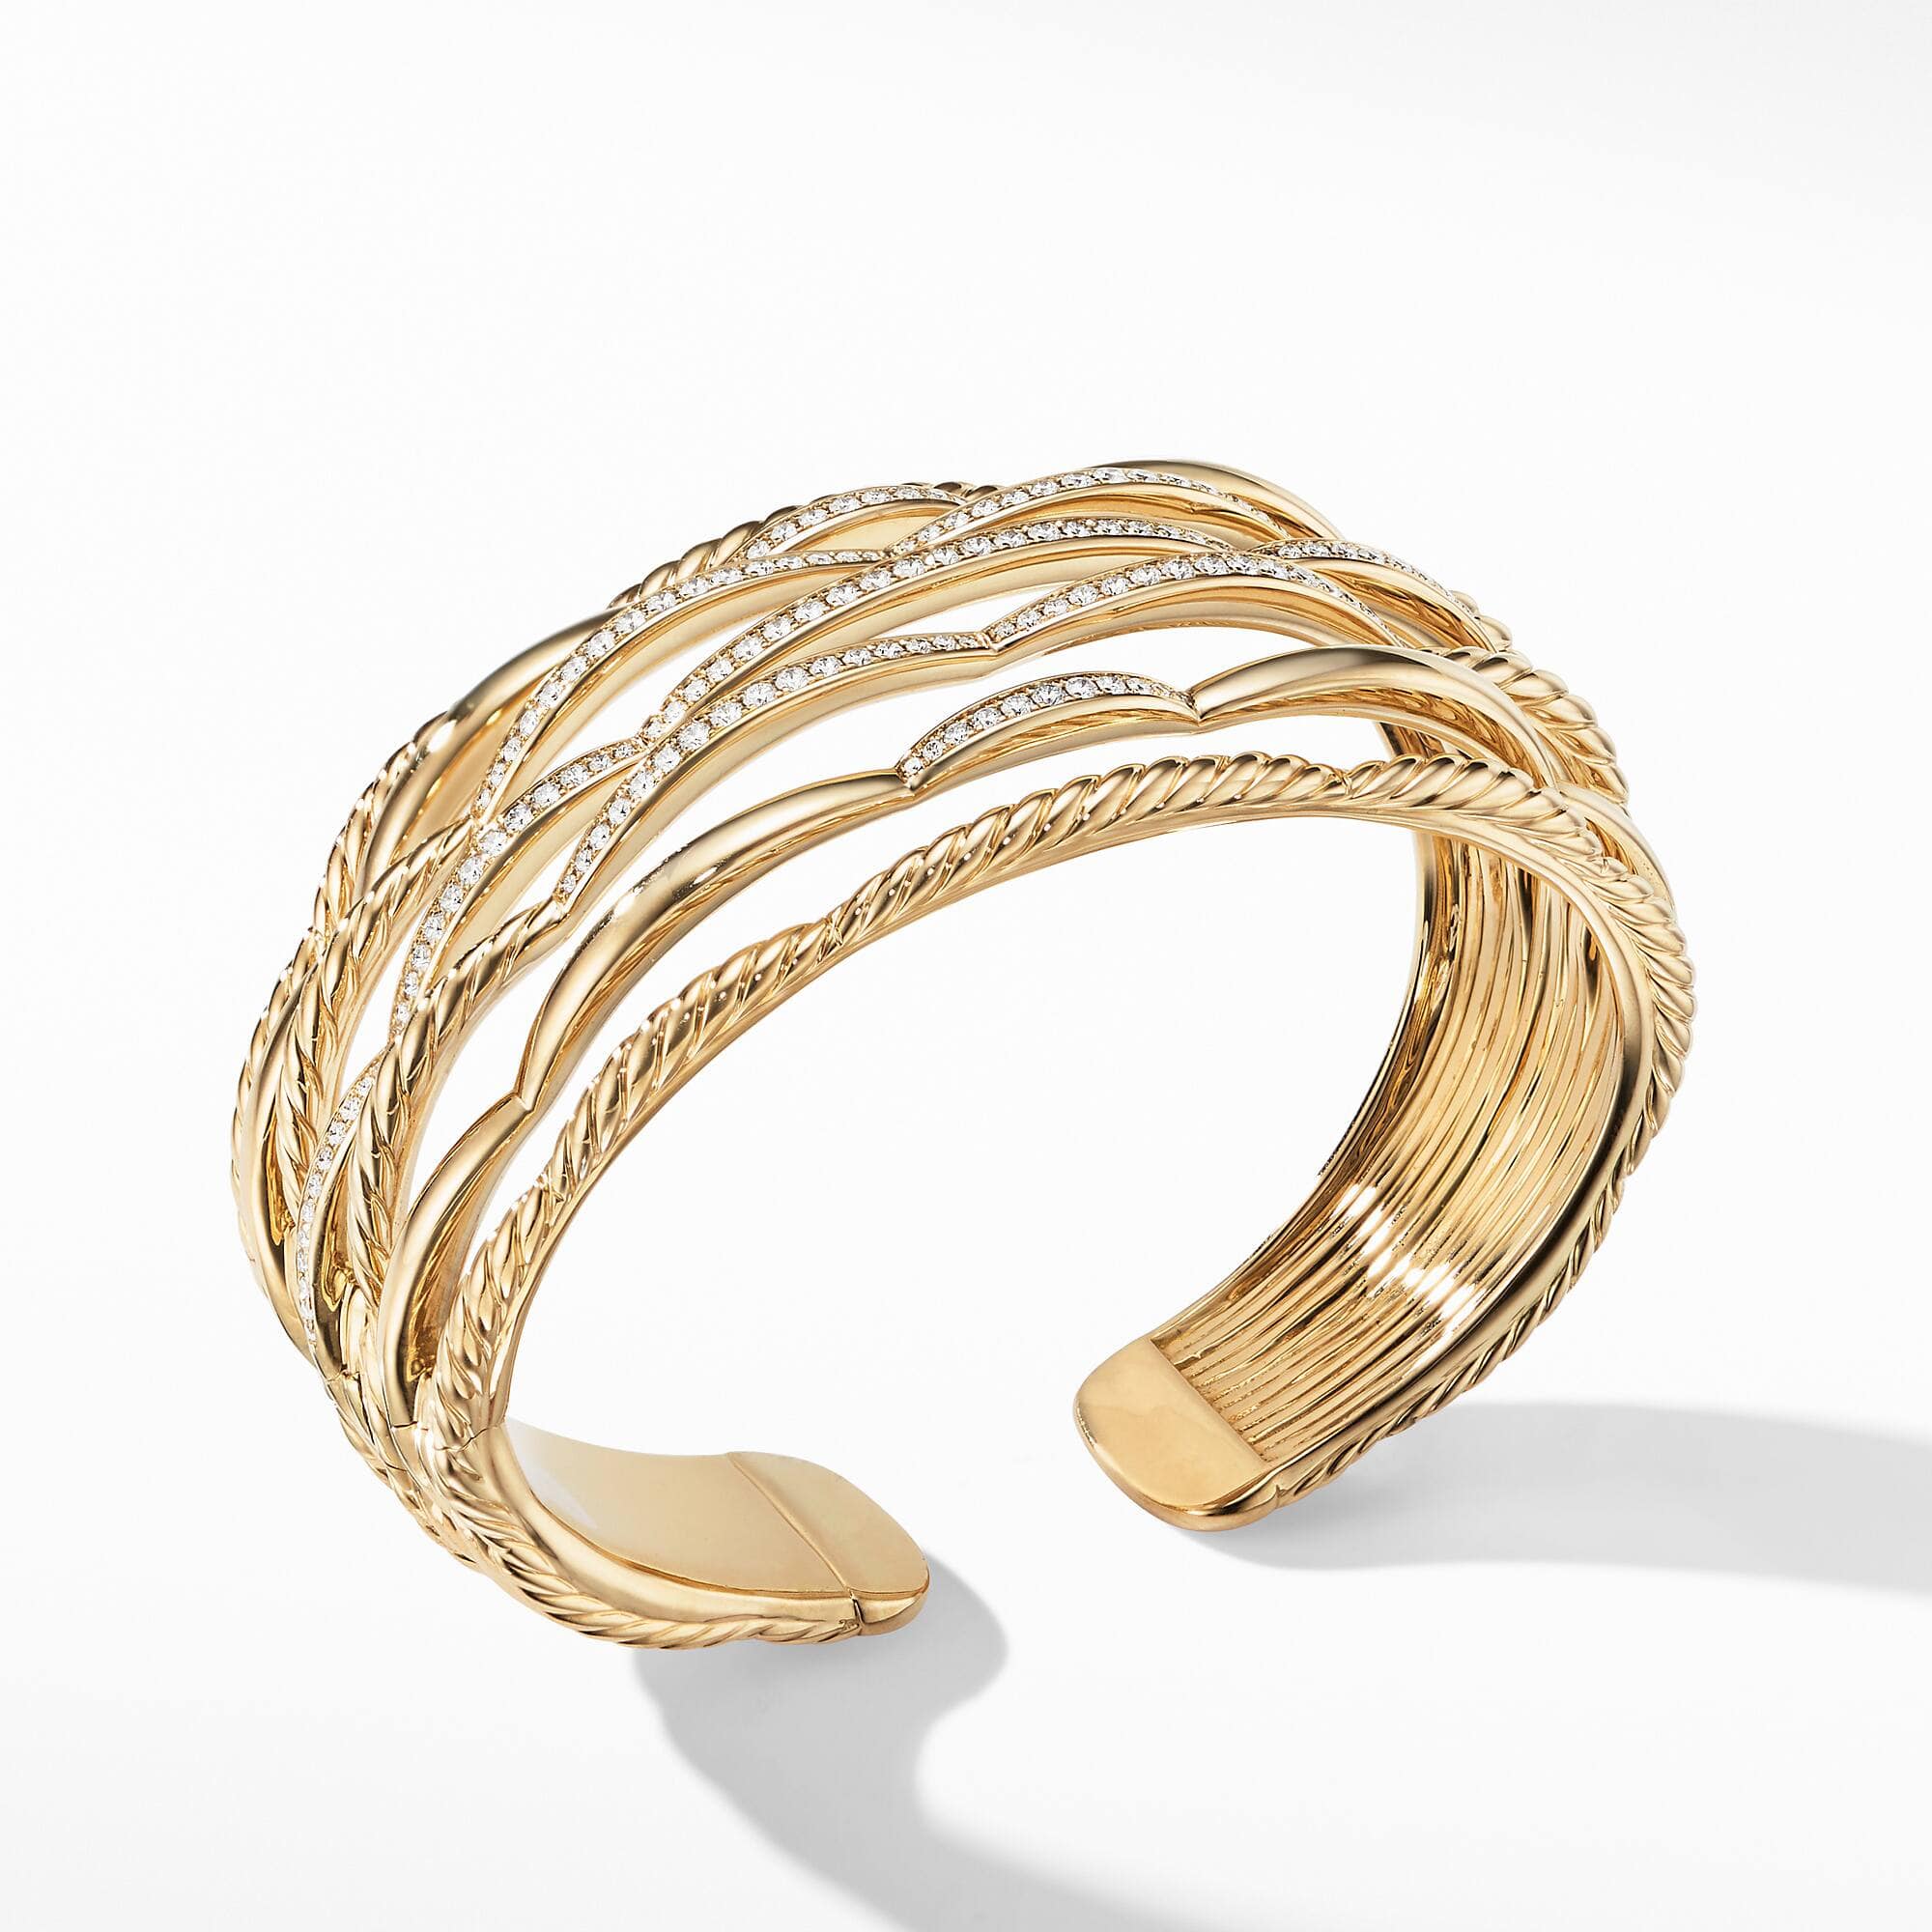 Tides Cuff Bracelet in 18K Yellow Gold with Diamonds